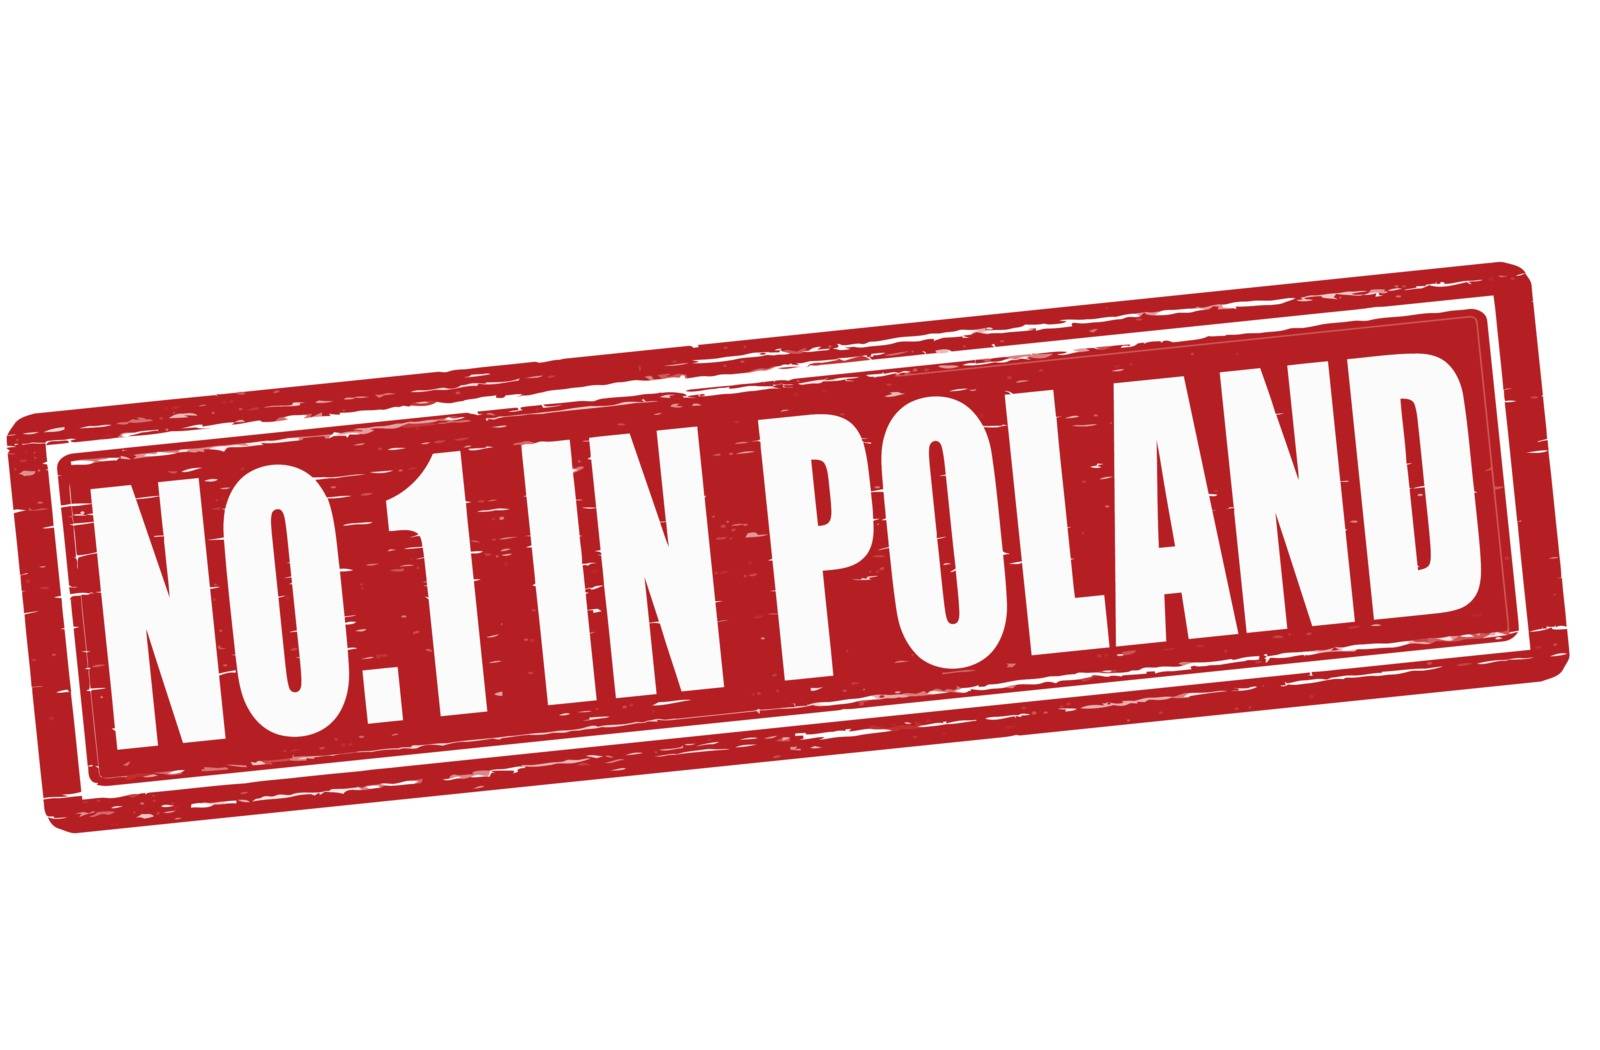 Stamp with text no one in Poland inside, vector illustration